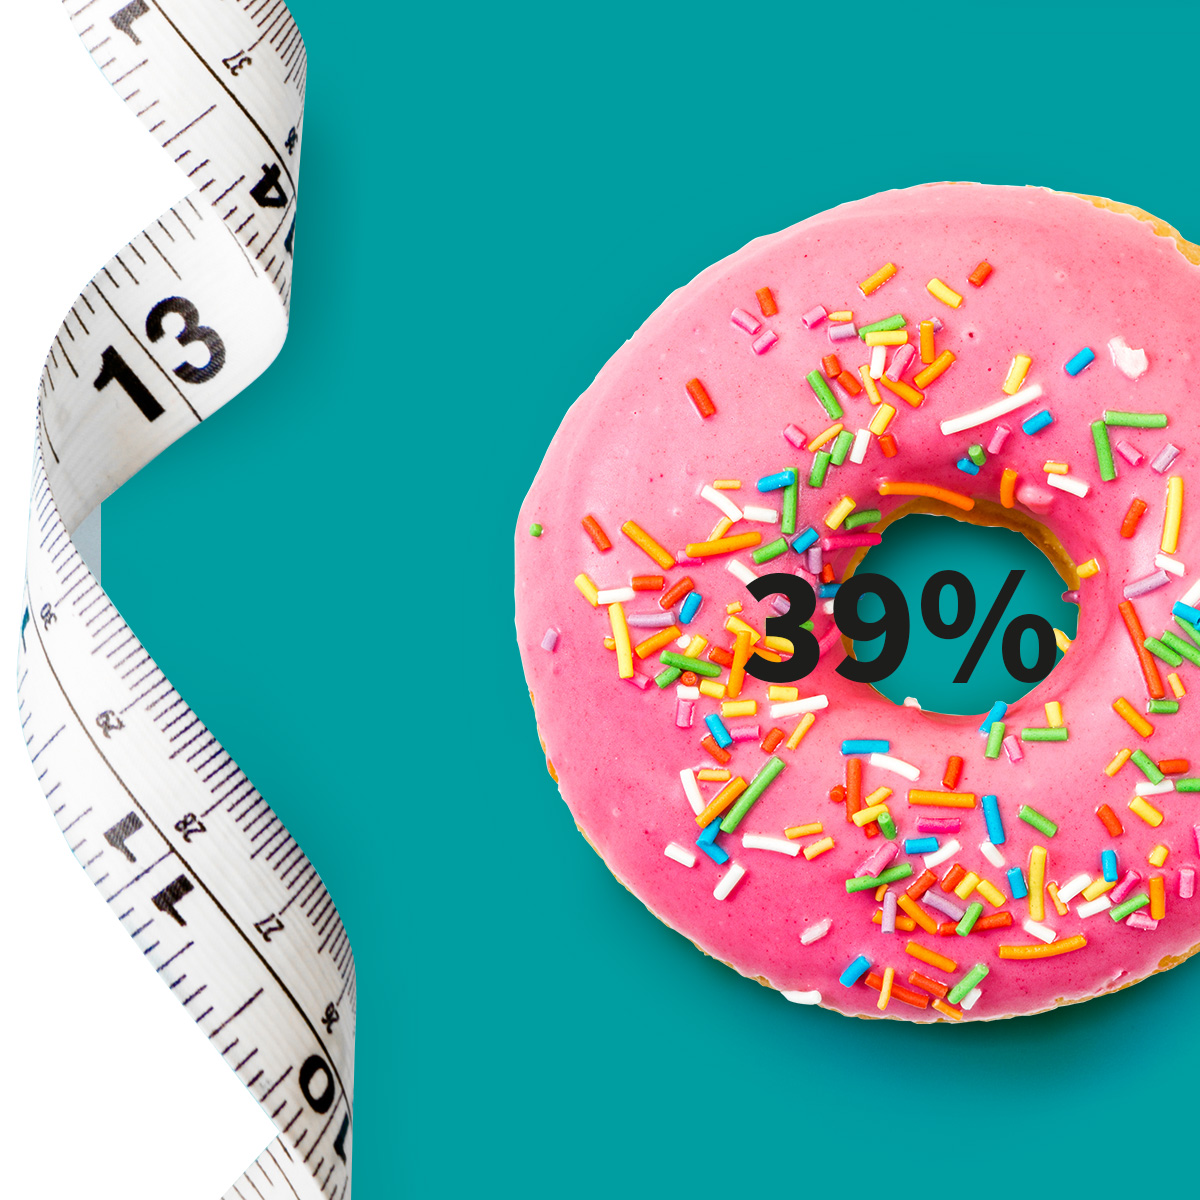 [Sysmex MEA (english)] •	A measuring tape and a doughnut with pink icing and colourful sugar sprinkle as a metaphor for obesity